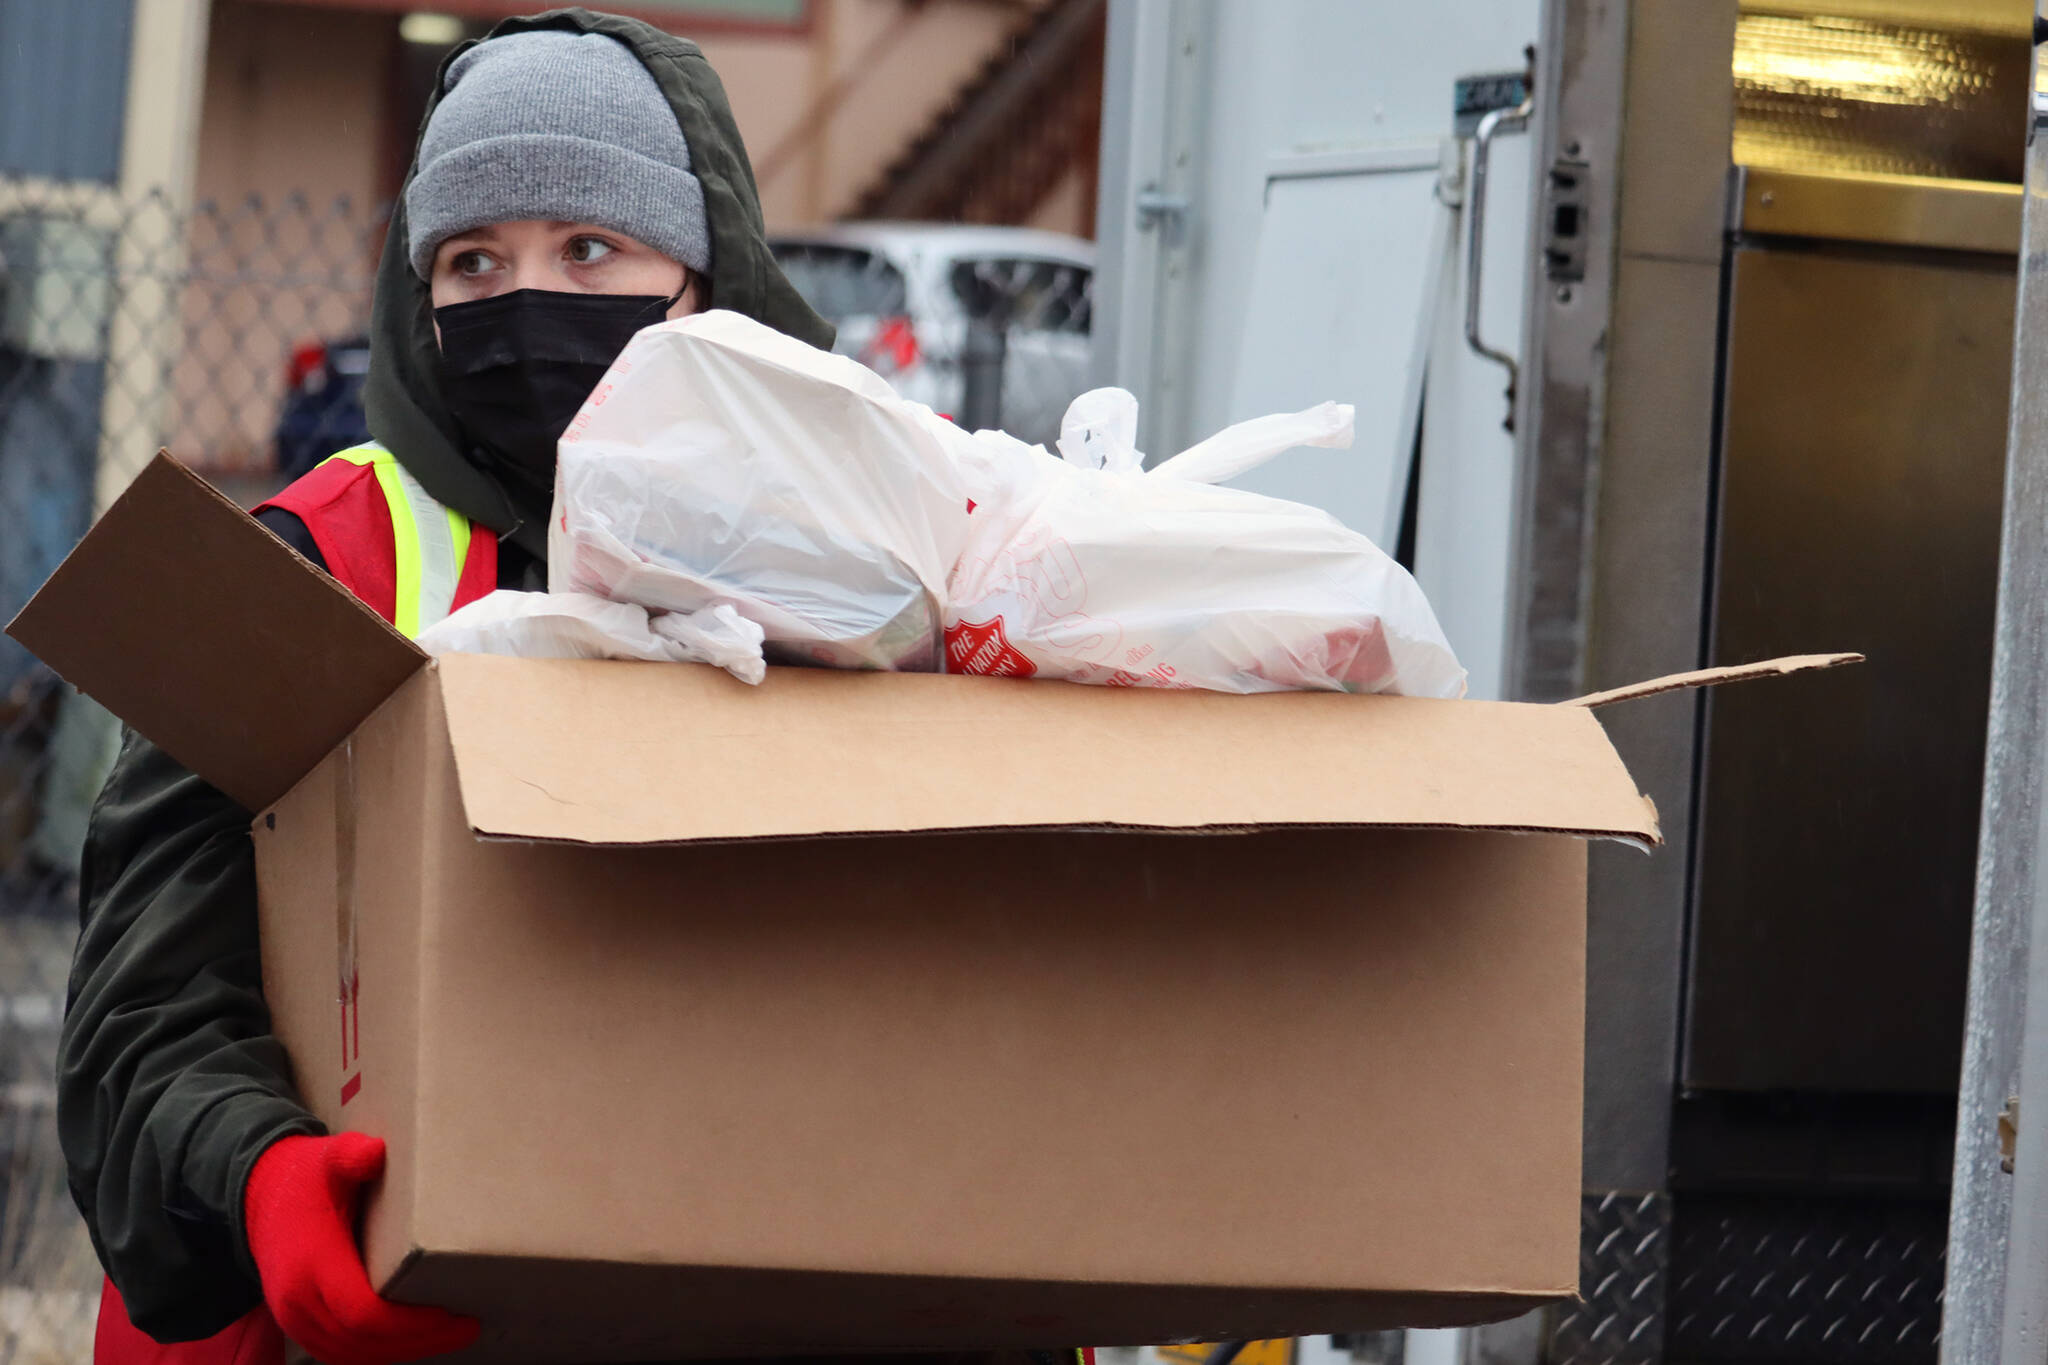 Meagan Bryd, an AmeriCorps volunteer, carries a box load of meals toward a vehicle for delivery on Thanksgiving. (Ben Hohenstatt Juneau Empire)